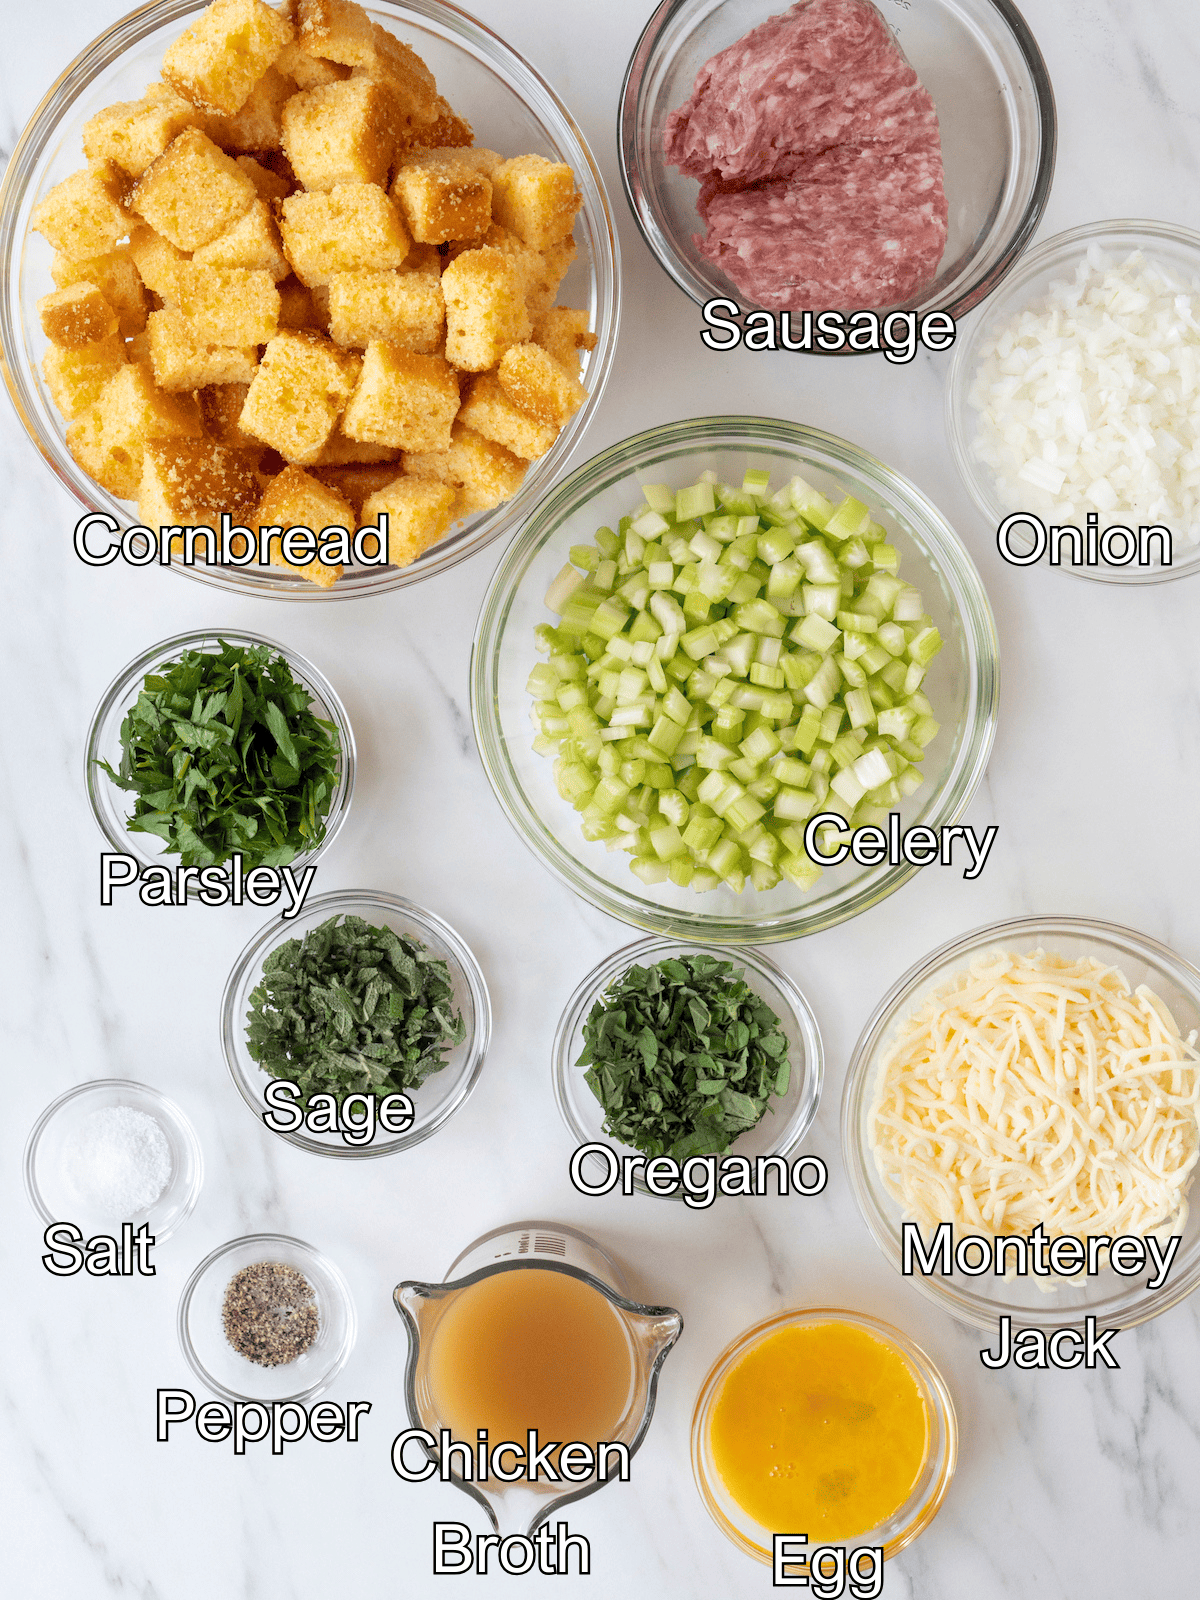 Mise-en-place with all the ingredients required to make cornbread stuffing with sausage.